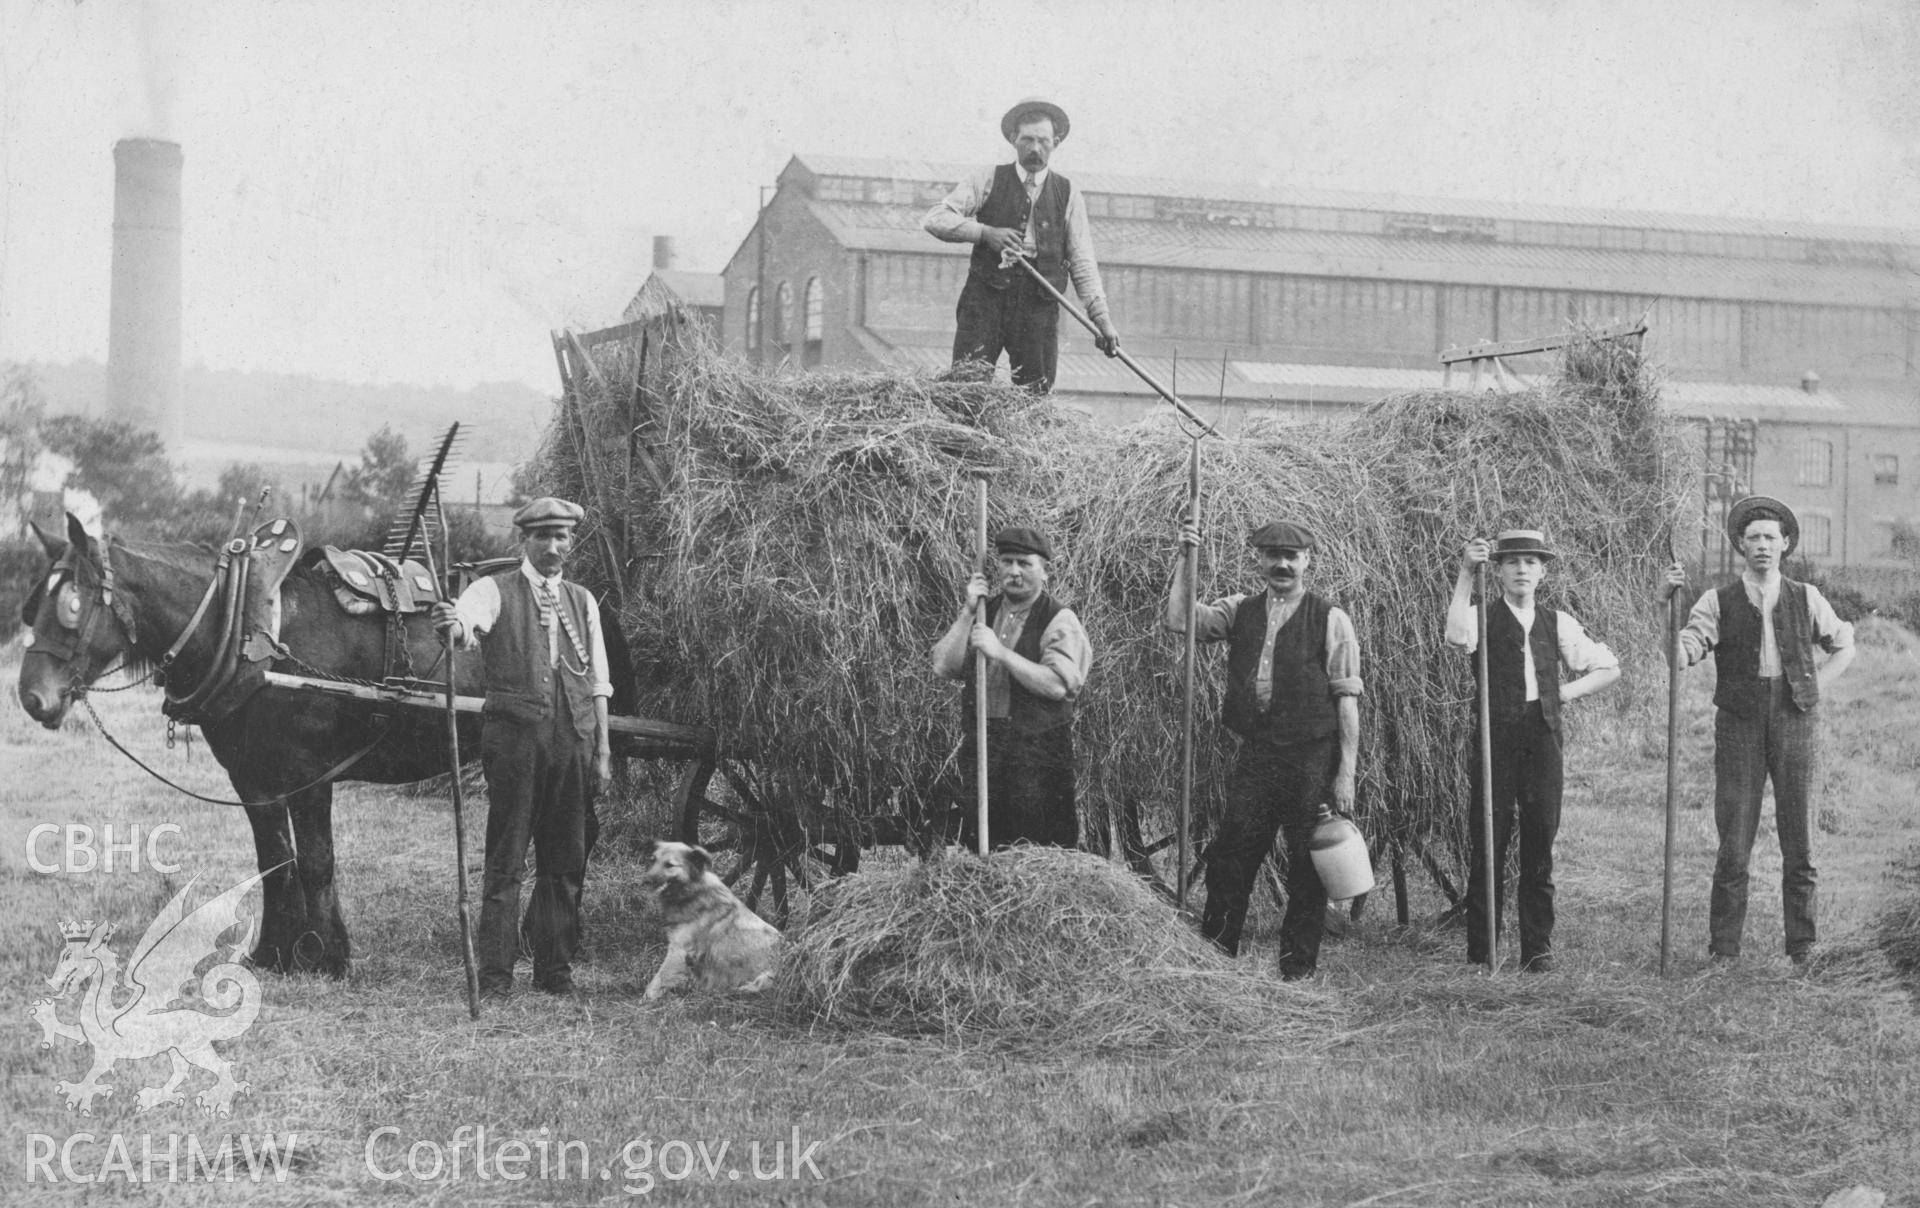 Postcard showing  haymaking at Ynysywern Farm with men and haycart. Dated between 1902 and 1910. In the background can be seen the chimney of the South Wales Power Company Power station at Upper Boat.